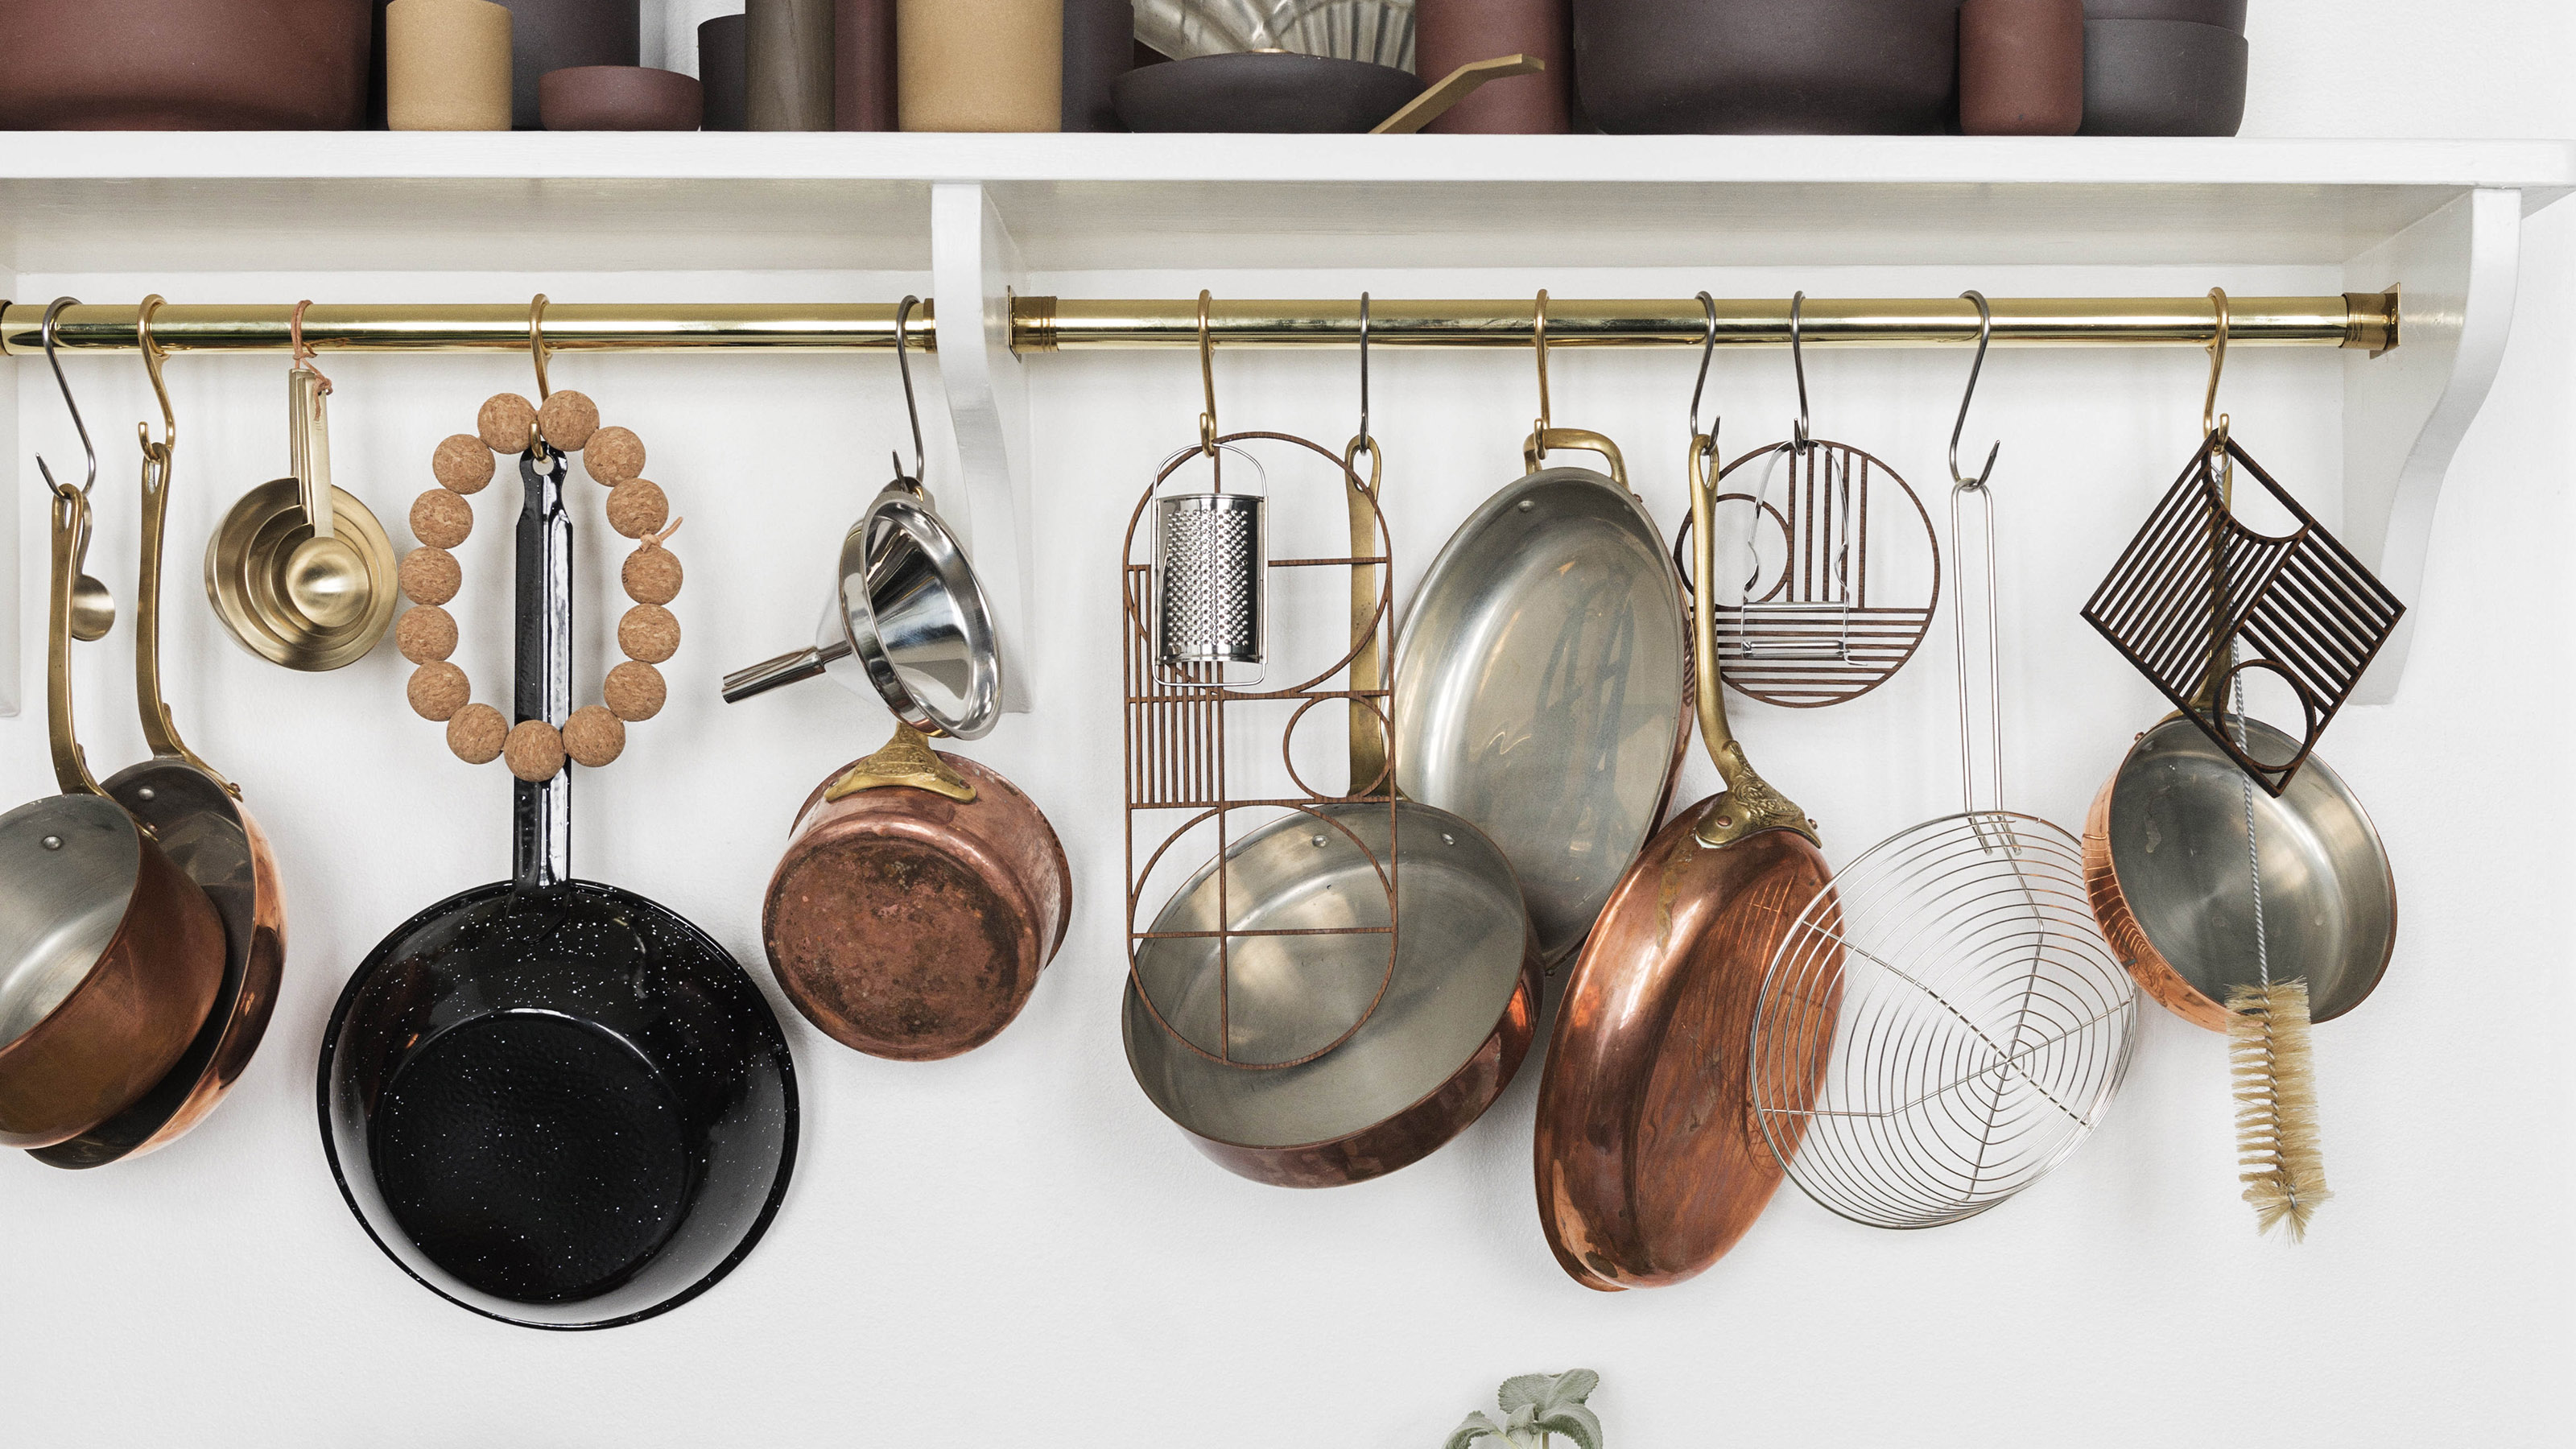 DIY Pots and Pans Organizer - 7 Ways to Organize Your Pots and